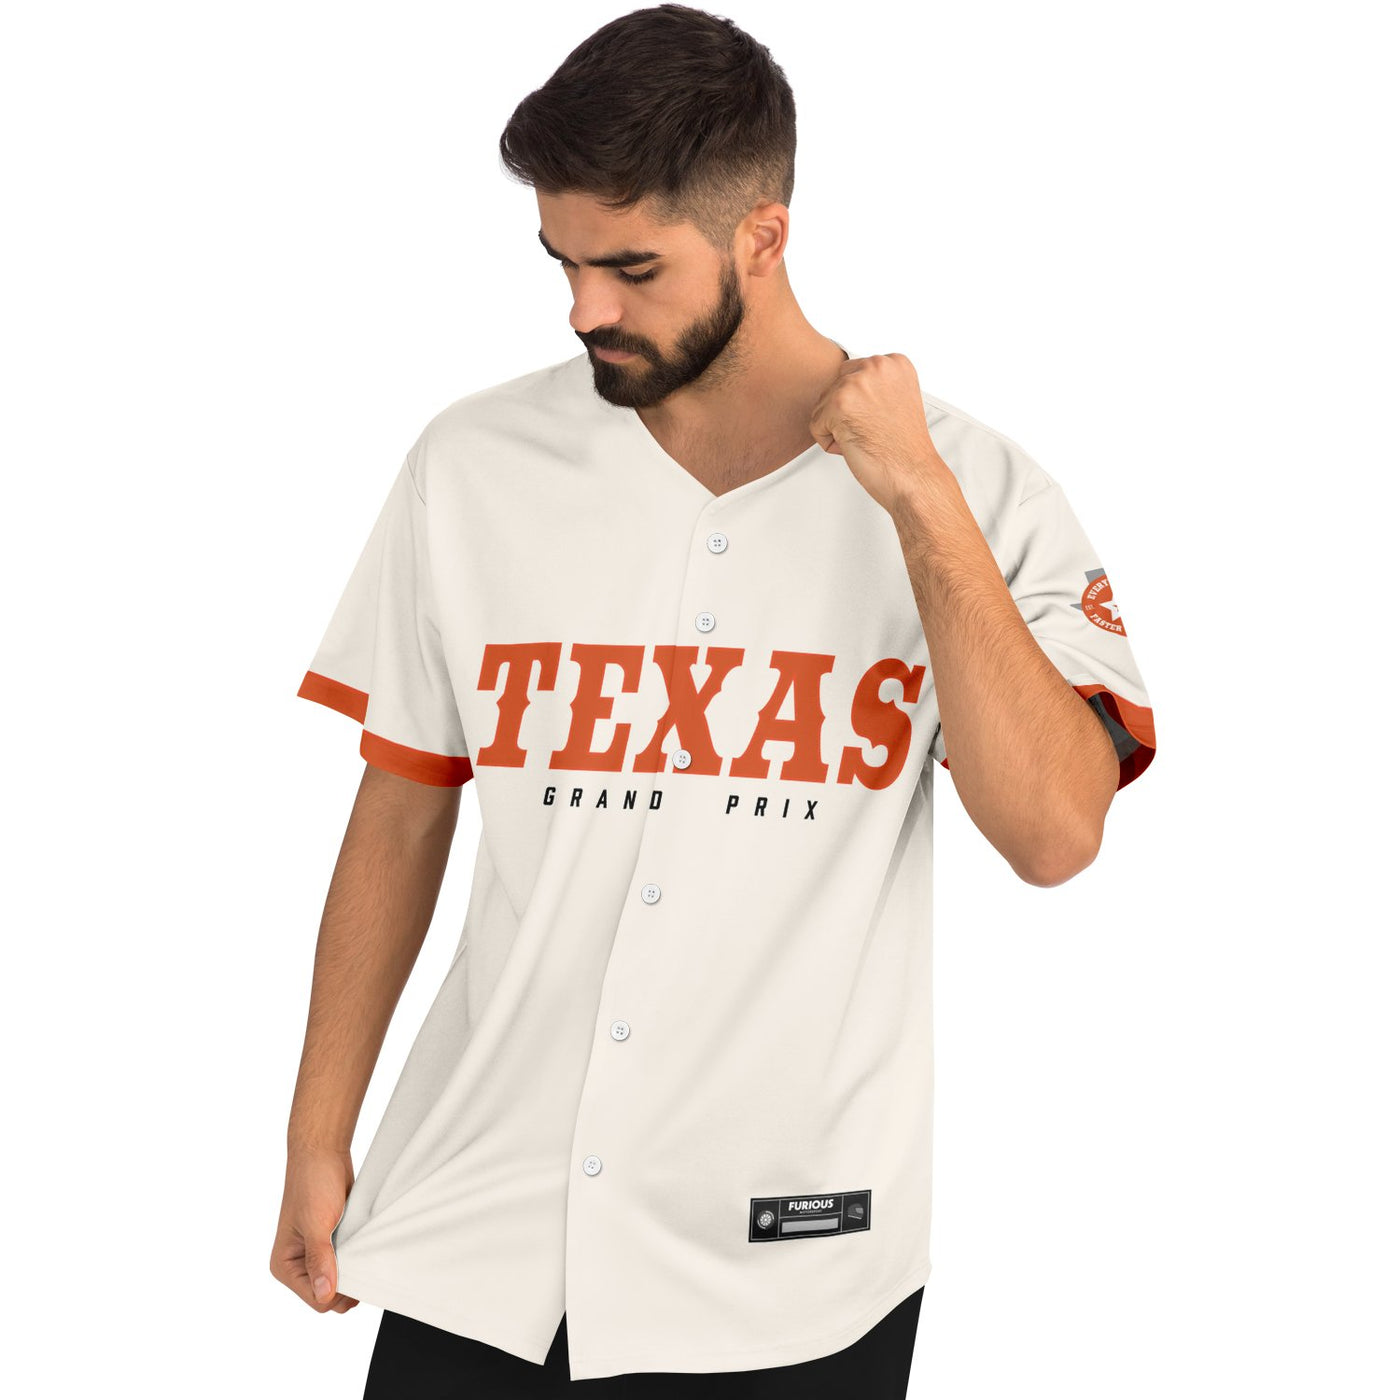 Alonso - Off-White Texas GP Jersey (Clearance) - Furious Motorsport